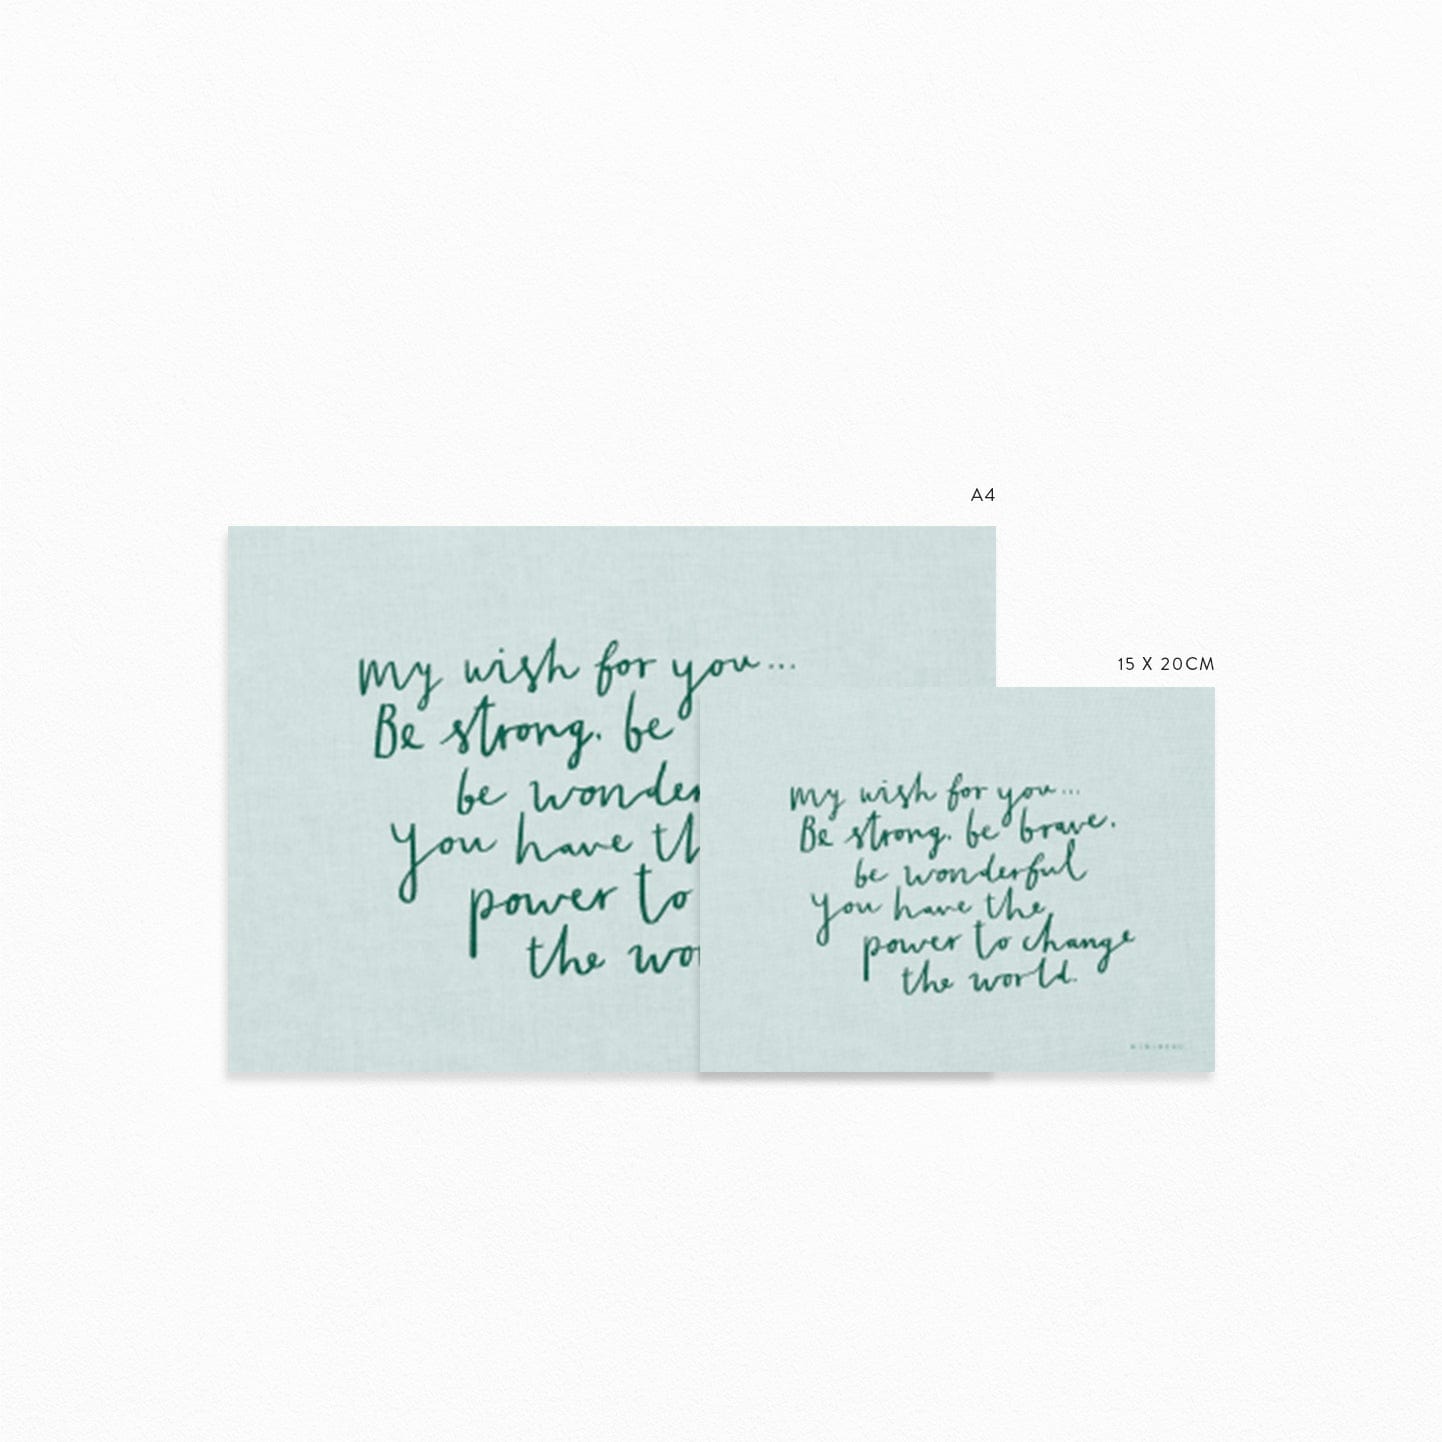 Image of both sizes of art print for comparison, 15x20cm and A4 Our My Wish for you art print in hand-written typography in green says MY WISH FOR YOU BE STRONG, BE BRAVE, BE WONDERFUL. YOU HAVE THE POWER TO CHANGE THE WORLD, on a light blue background.